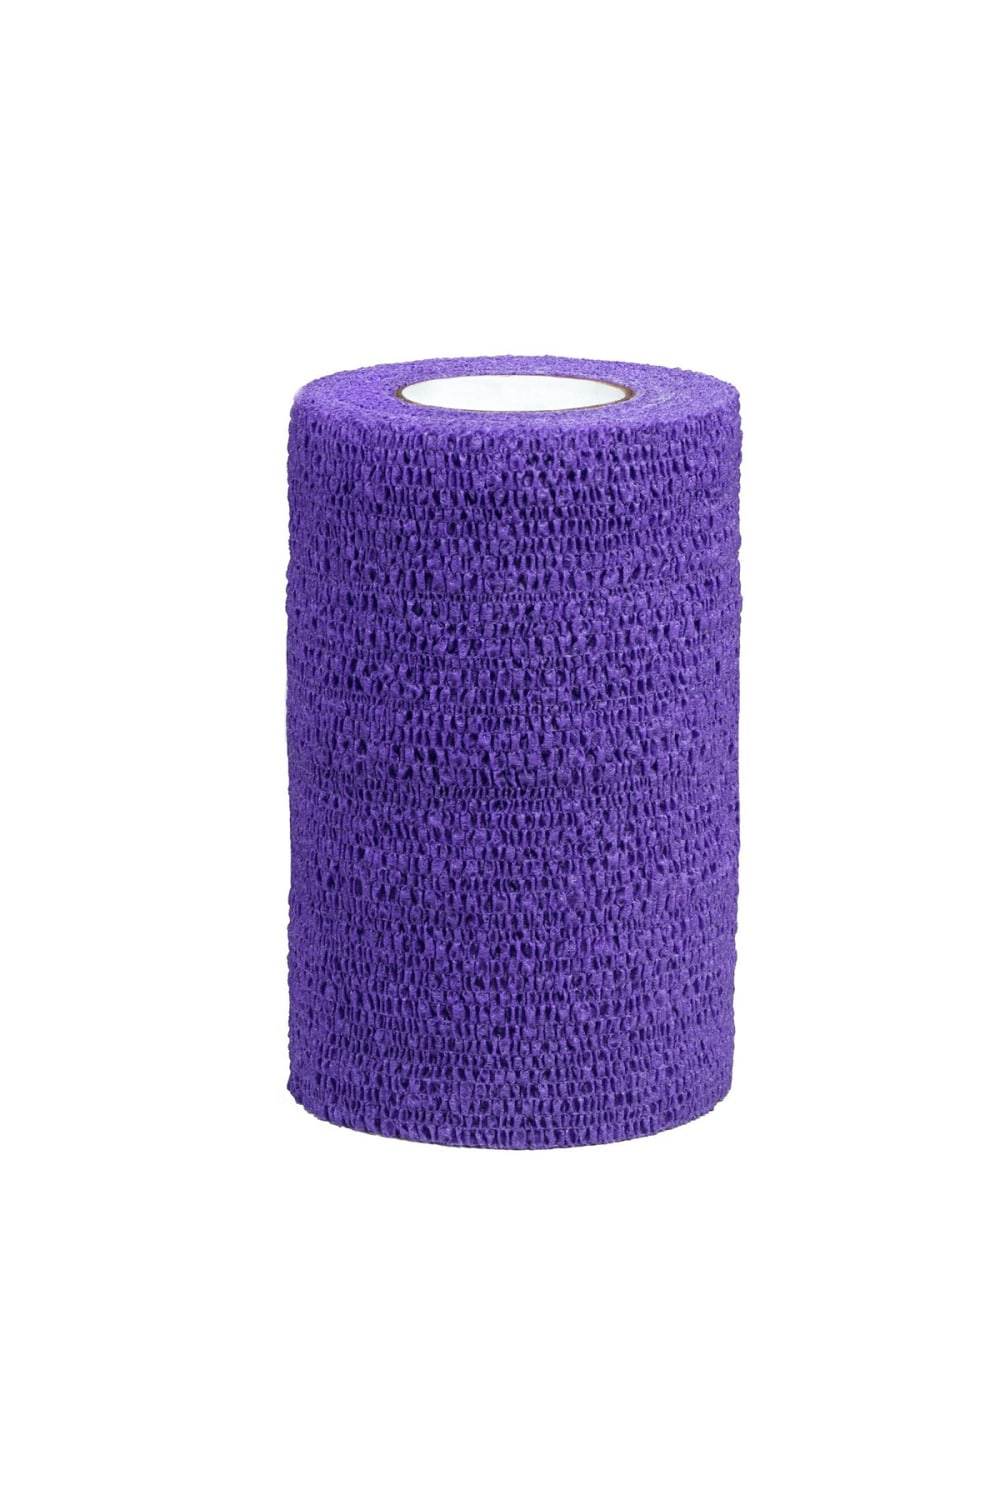 Vetrap 4 inch Bandage (Purple) (4 inches (Pack of 100))